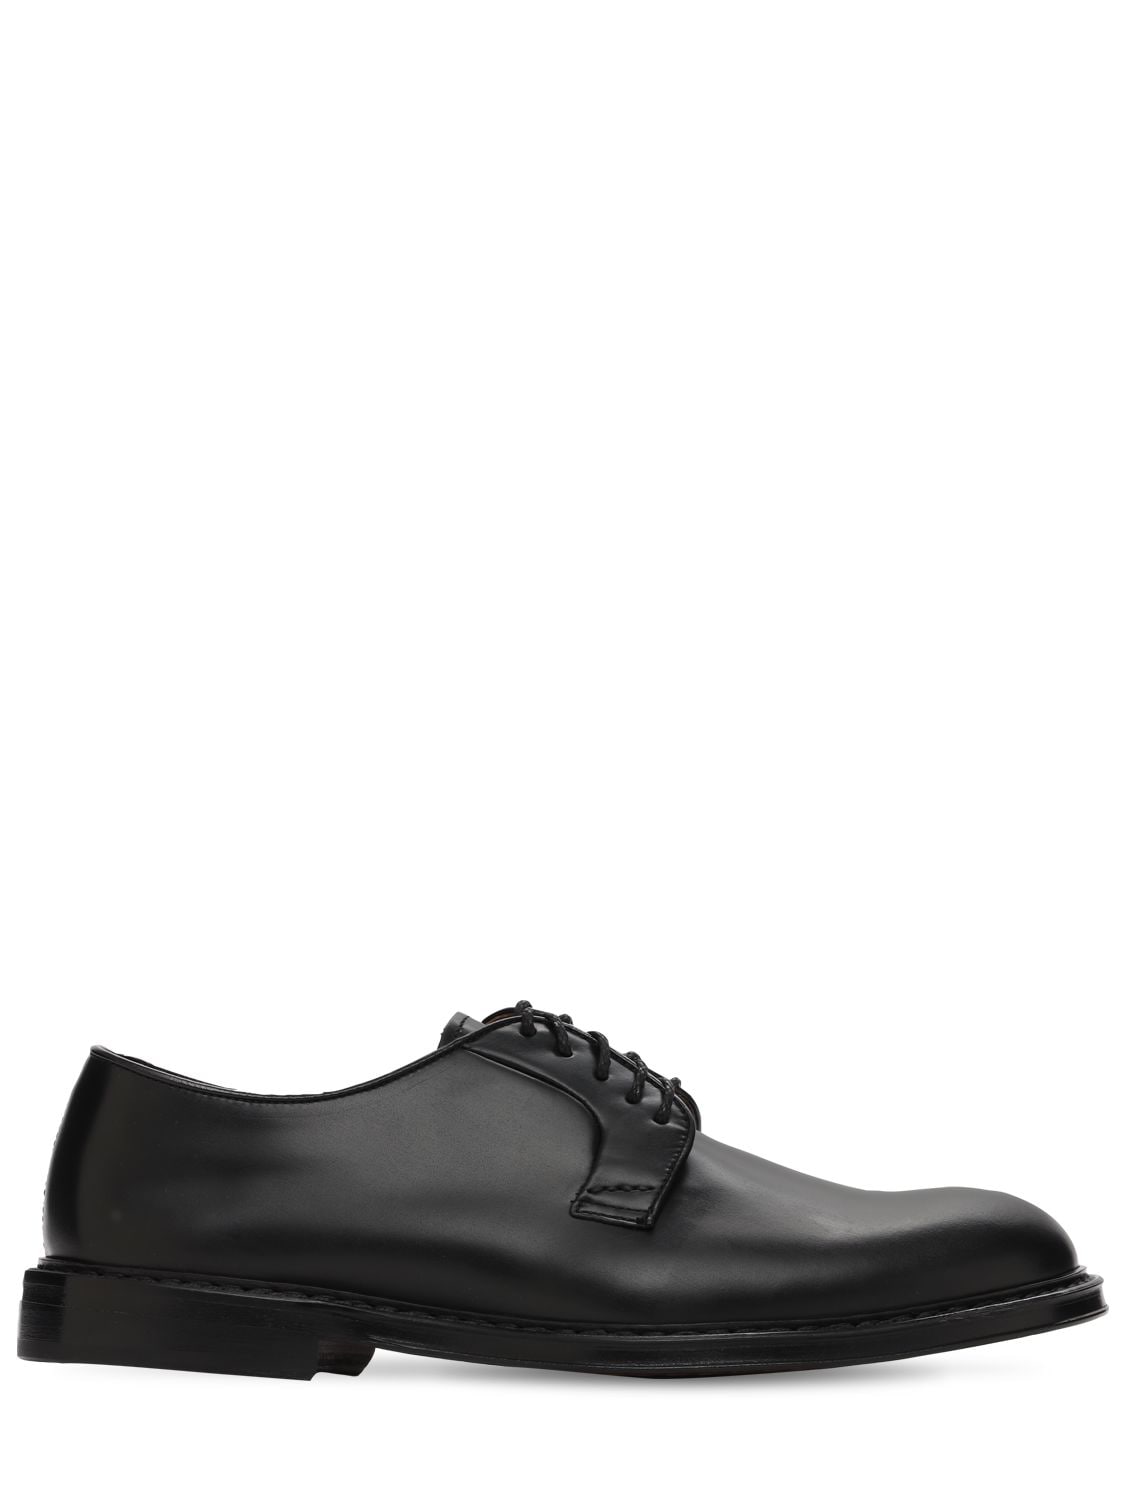 Doucal S Leather Lace Up Shoes Black Luisaviaroma